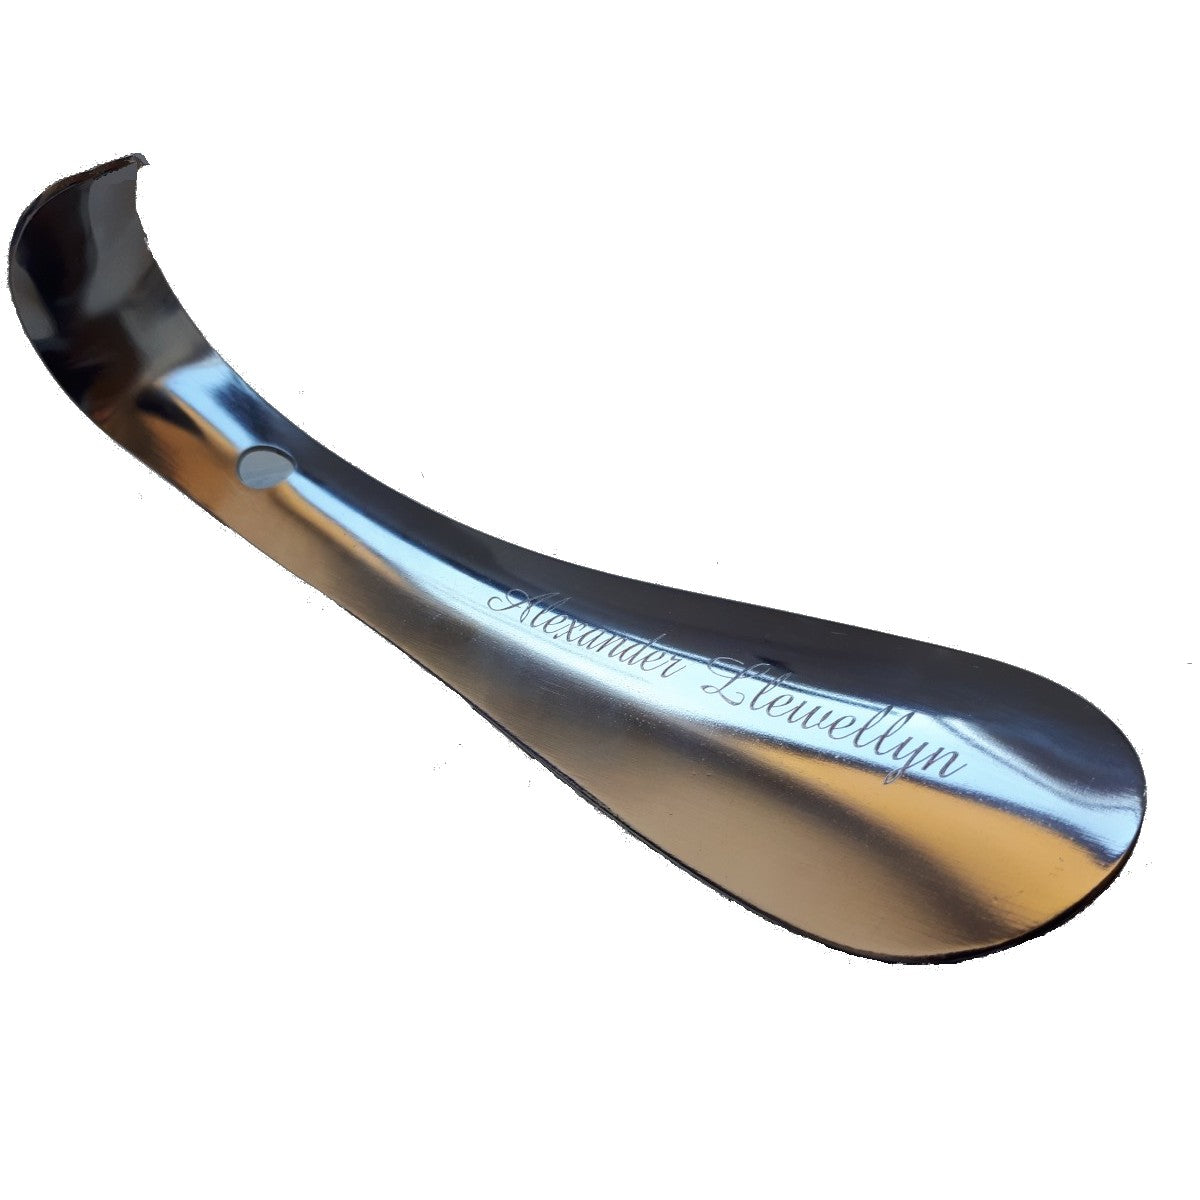 Personalised Engraved Shoe Horn